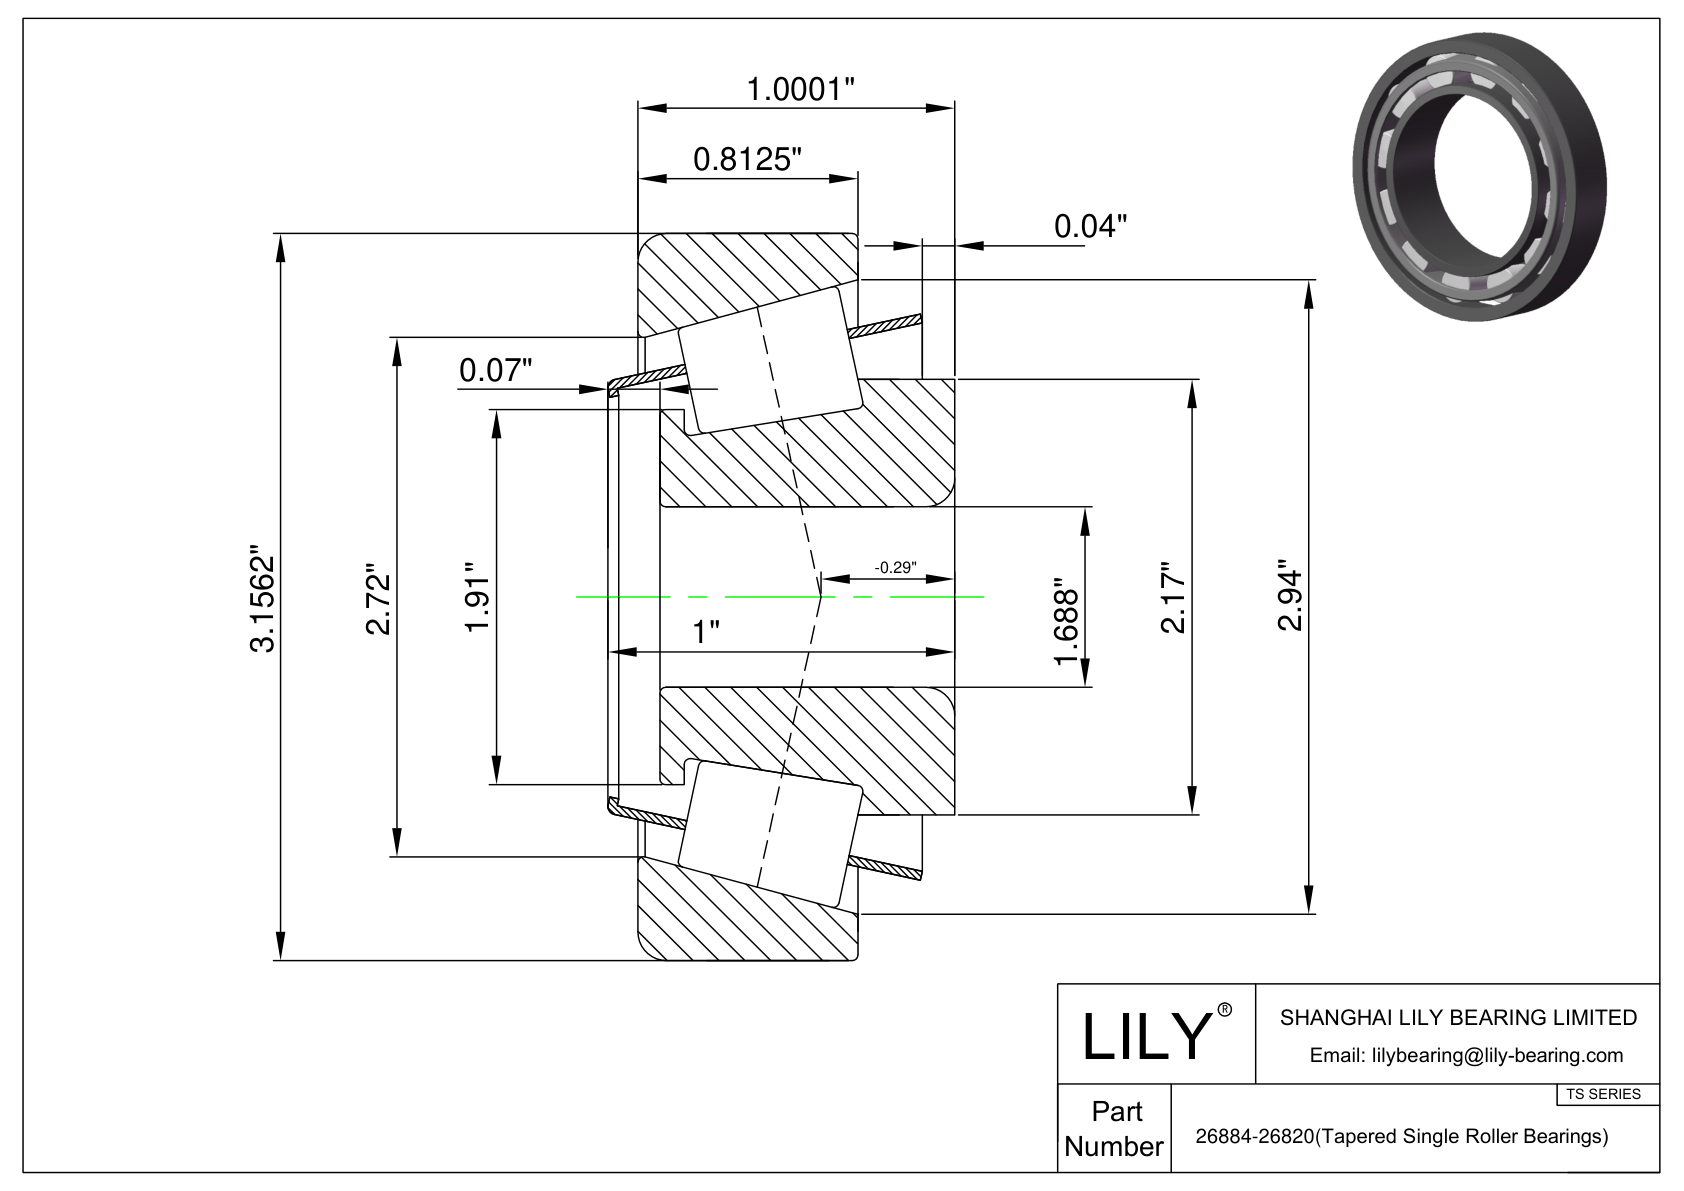 26884-26820 TS (Tapered Single Roller Bearings) (Imperial) cad drawing